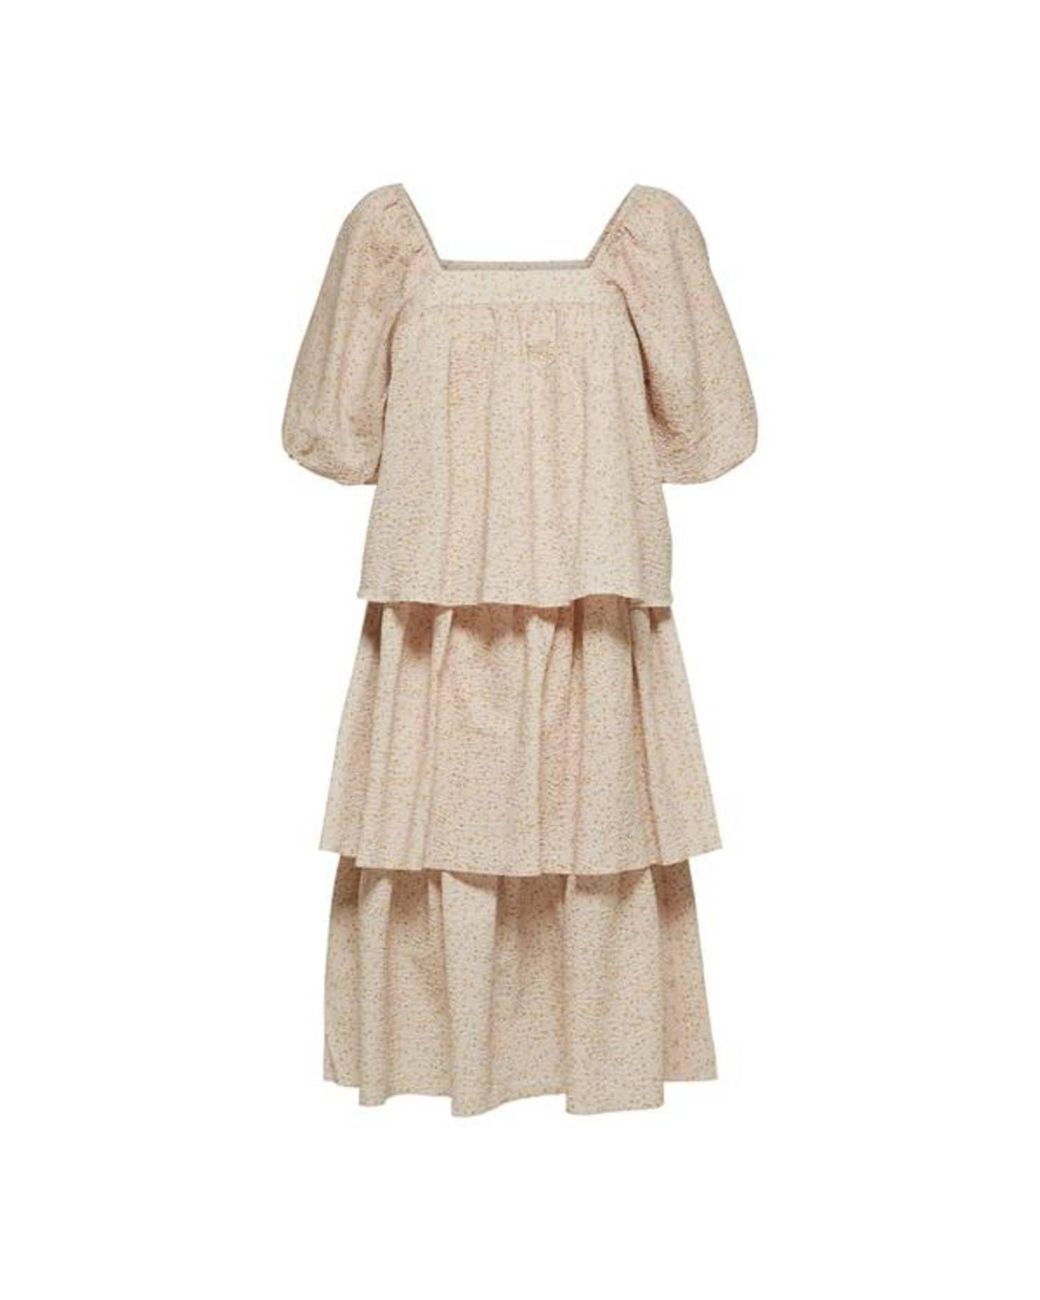 SELECTED Slfvix Cream Cotton Frill Dress in Natural - Lyst